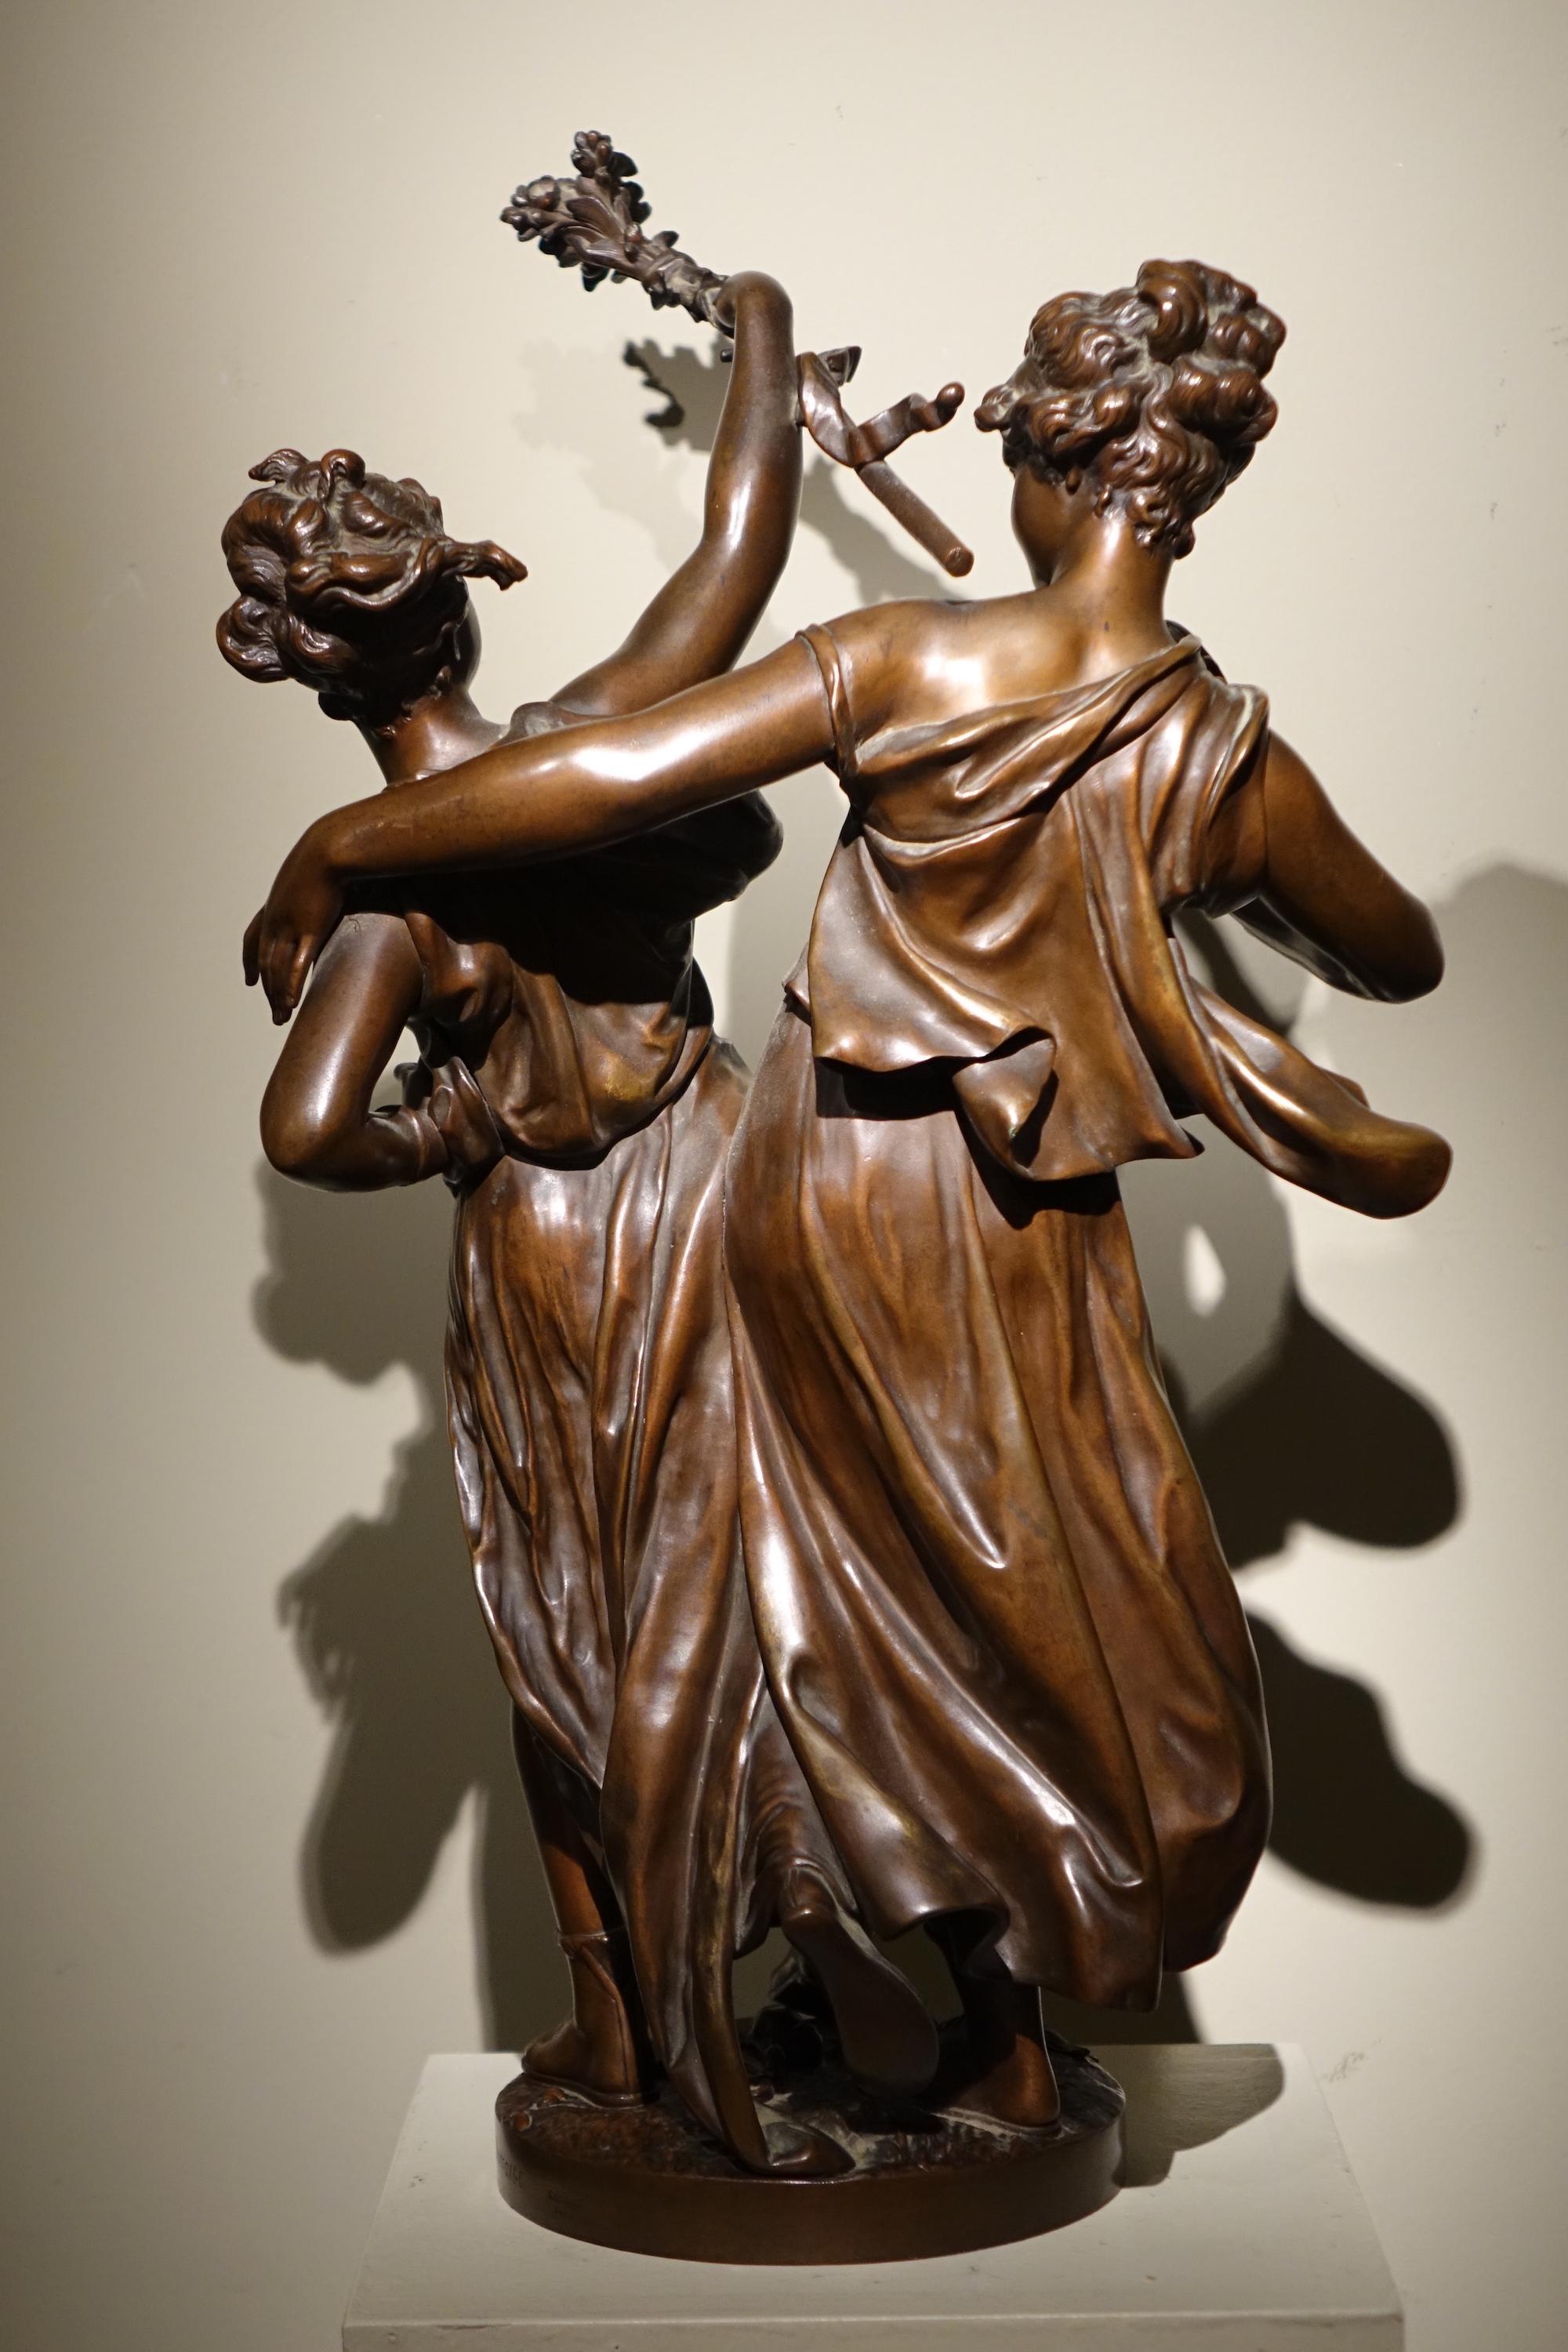 Bacchanal, or two young girls dancing and playing the tambourine, one carrying a wand decorated with flowers.
Bronze with Brown patina signed DUMAIGE
Henry Etienne Dumaige (1830-1888) was a French sculptor. He was a pupil of Jean Feuchère and